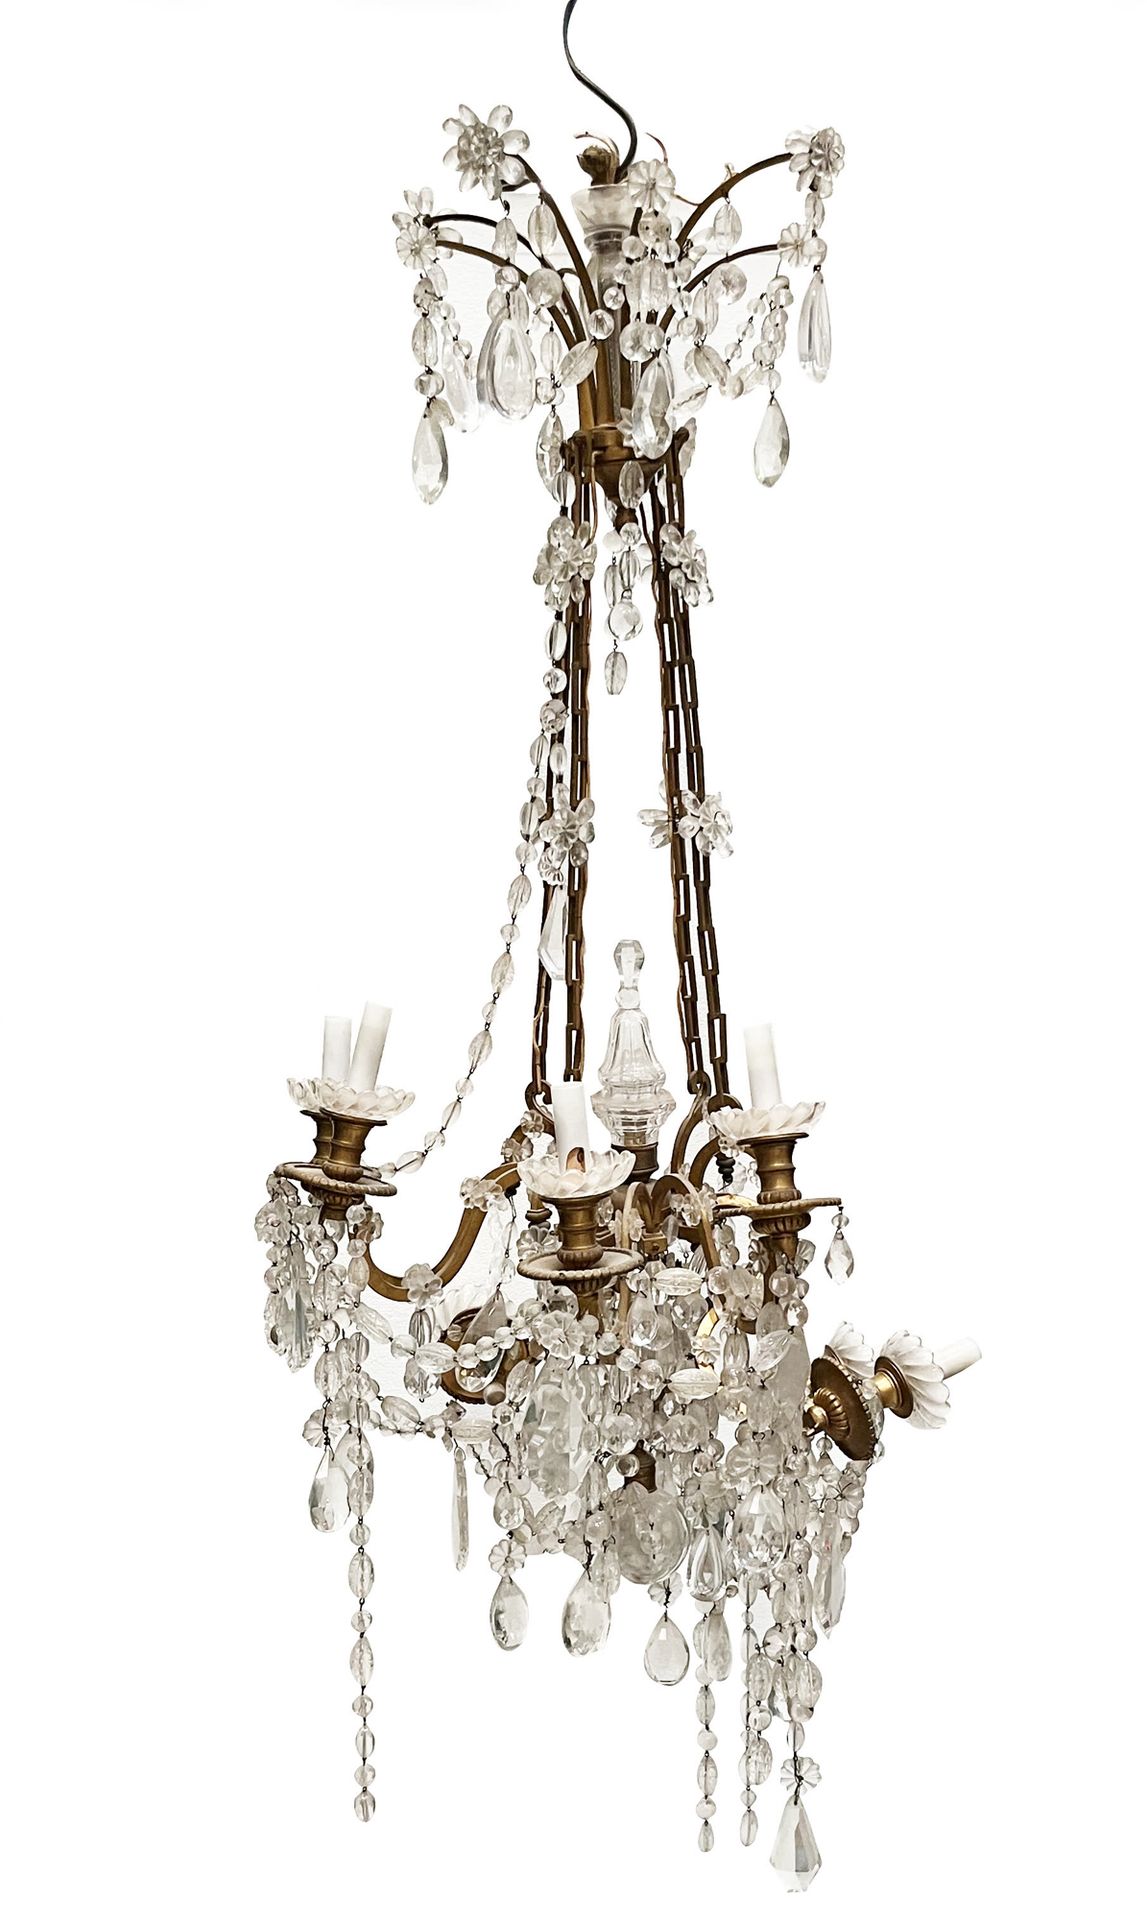 Null Gilded bronze chandelier with 8 arms of lights (accidents). H_120 cm